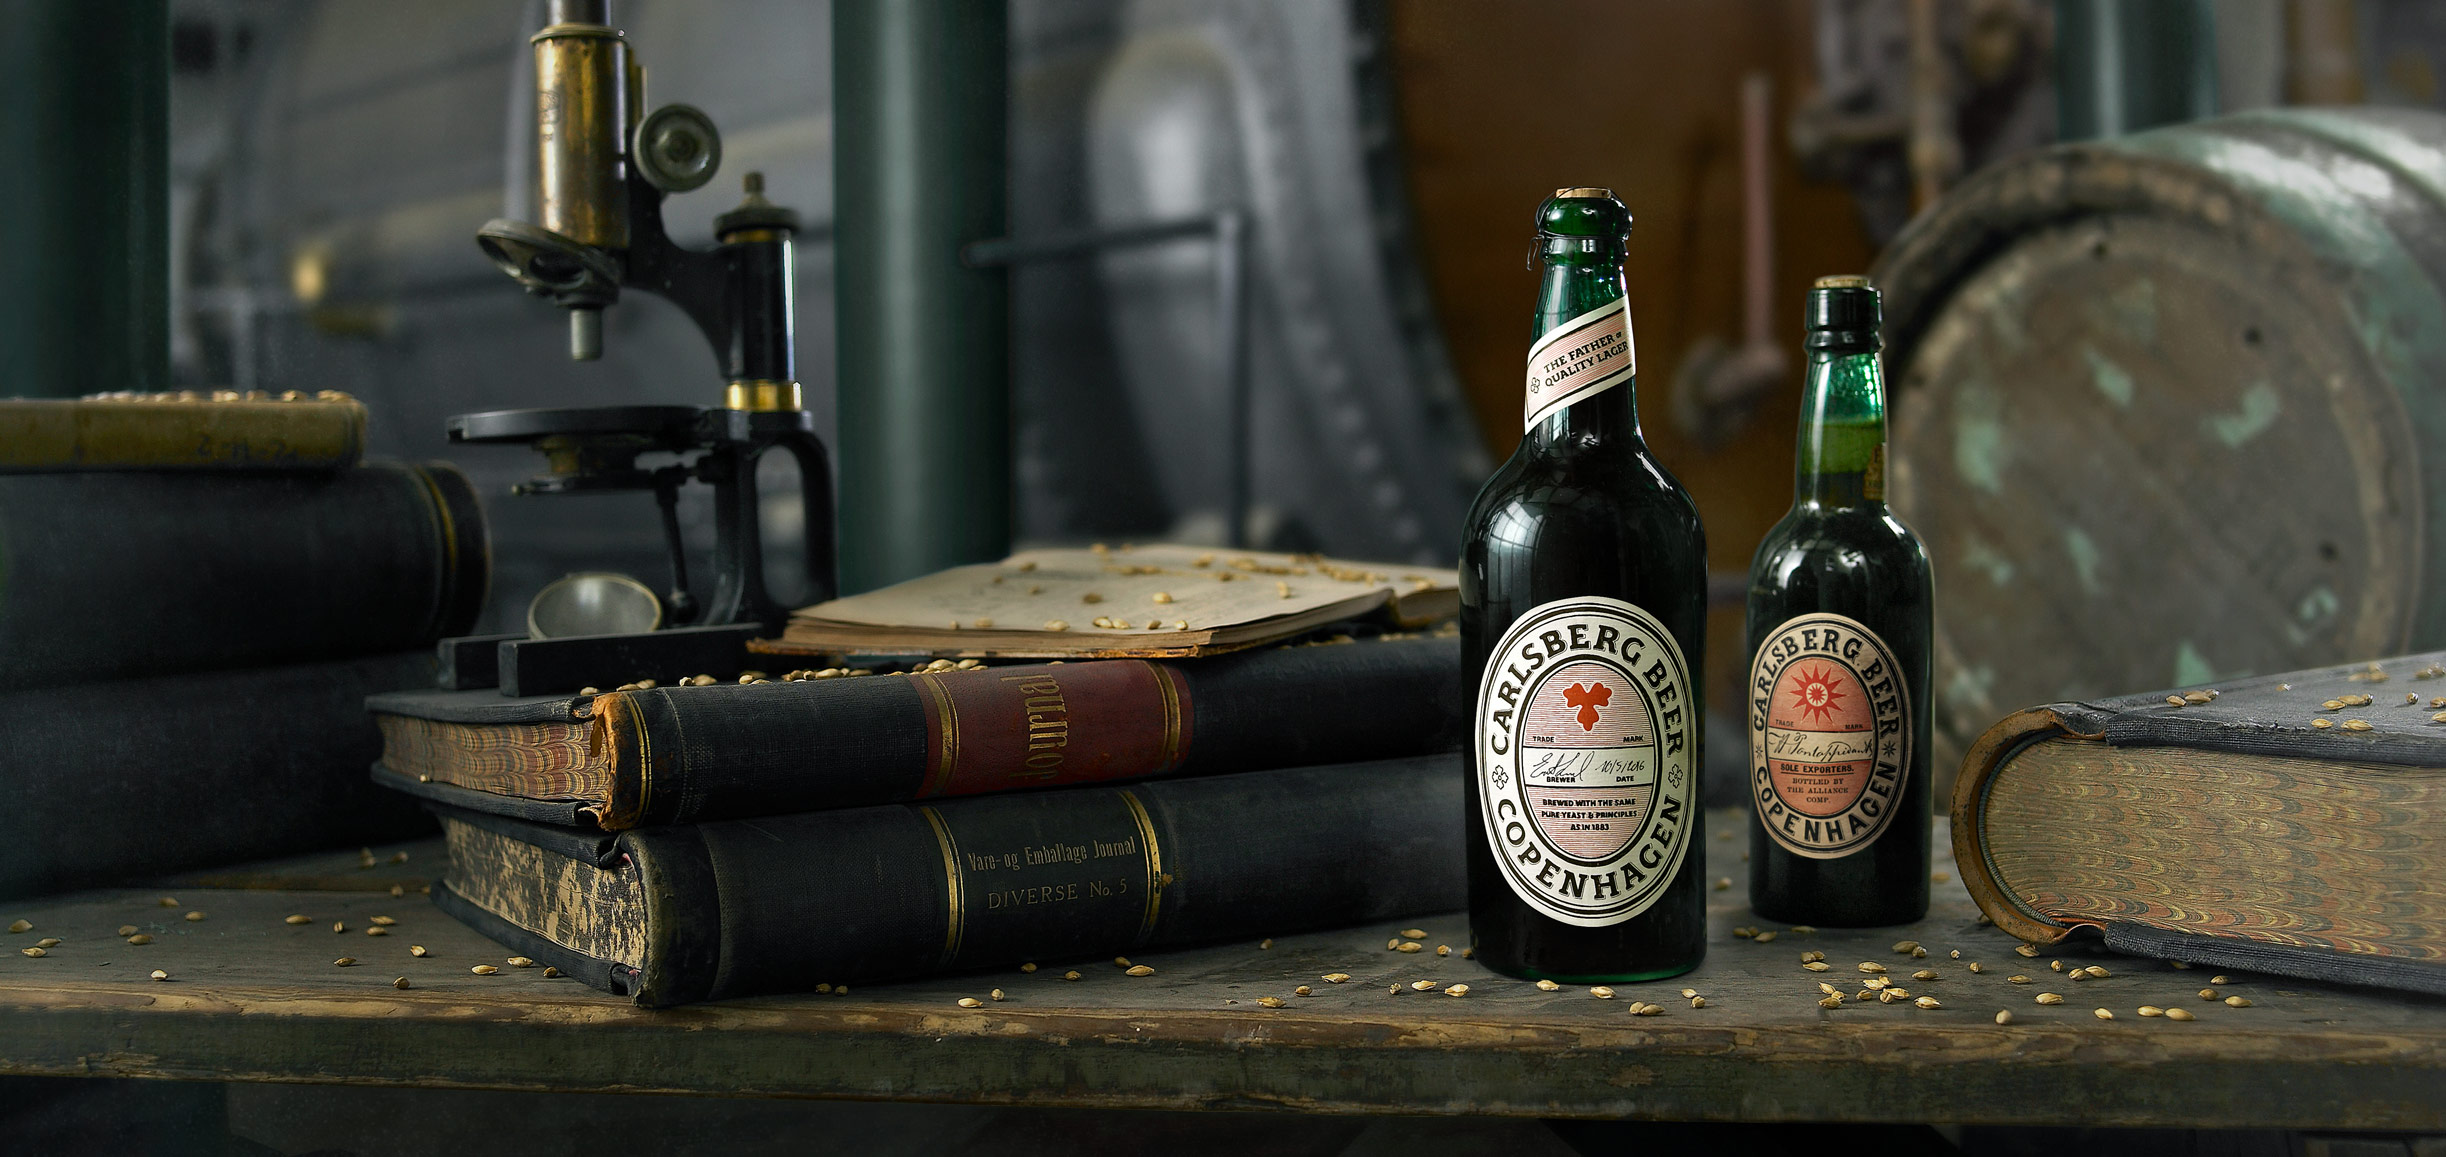 Leading scientists and brewers re-brewed the world’s first quality lager in the most authentic manner, using the original pure yeast and the exact same recipe, ingredients and brewing techniques from 1883.